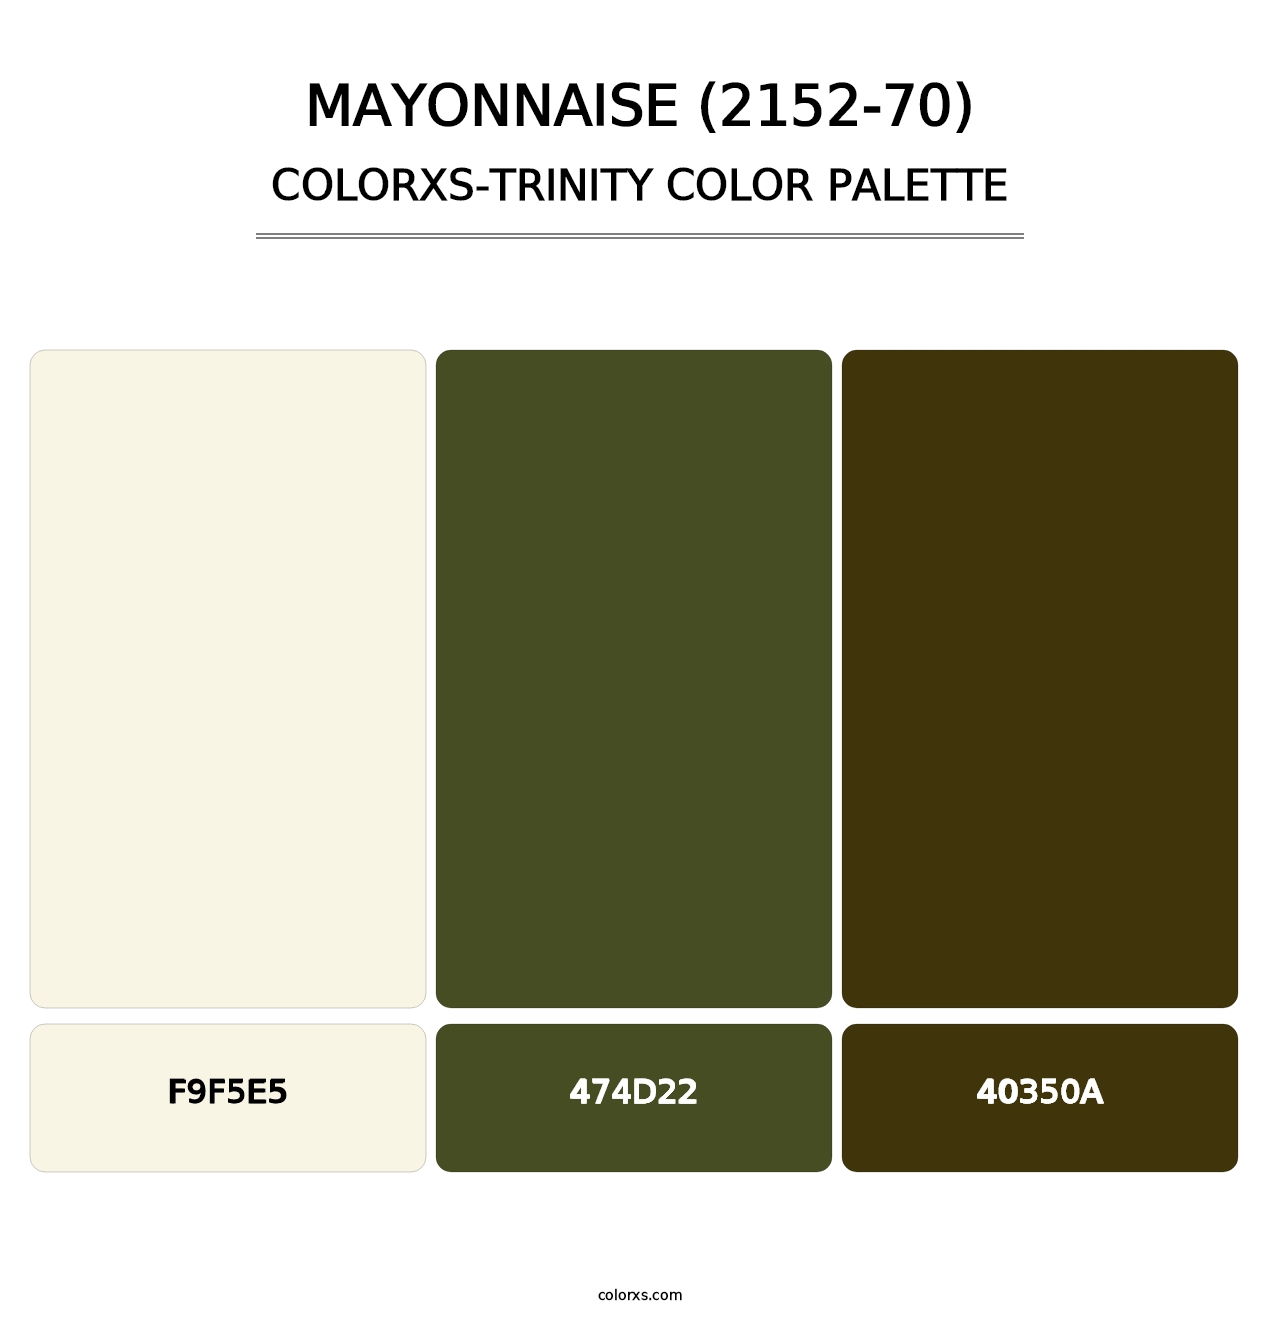 Mayonnaise (2152-70) - Colorxs Trinity Palette